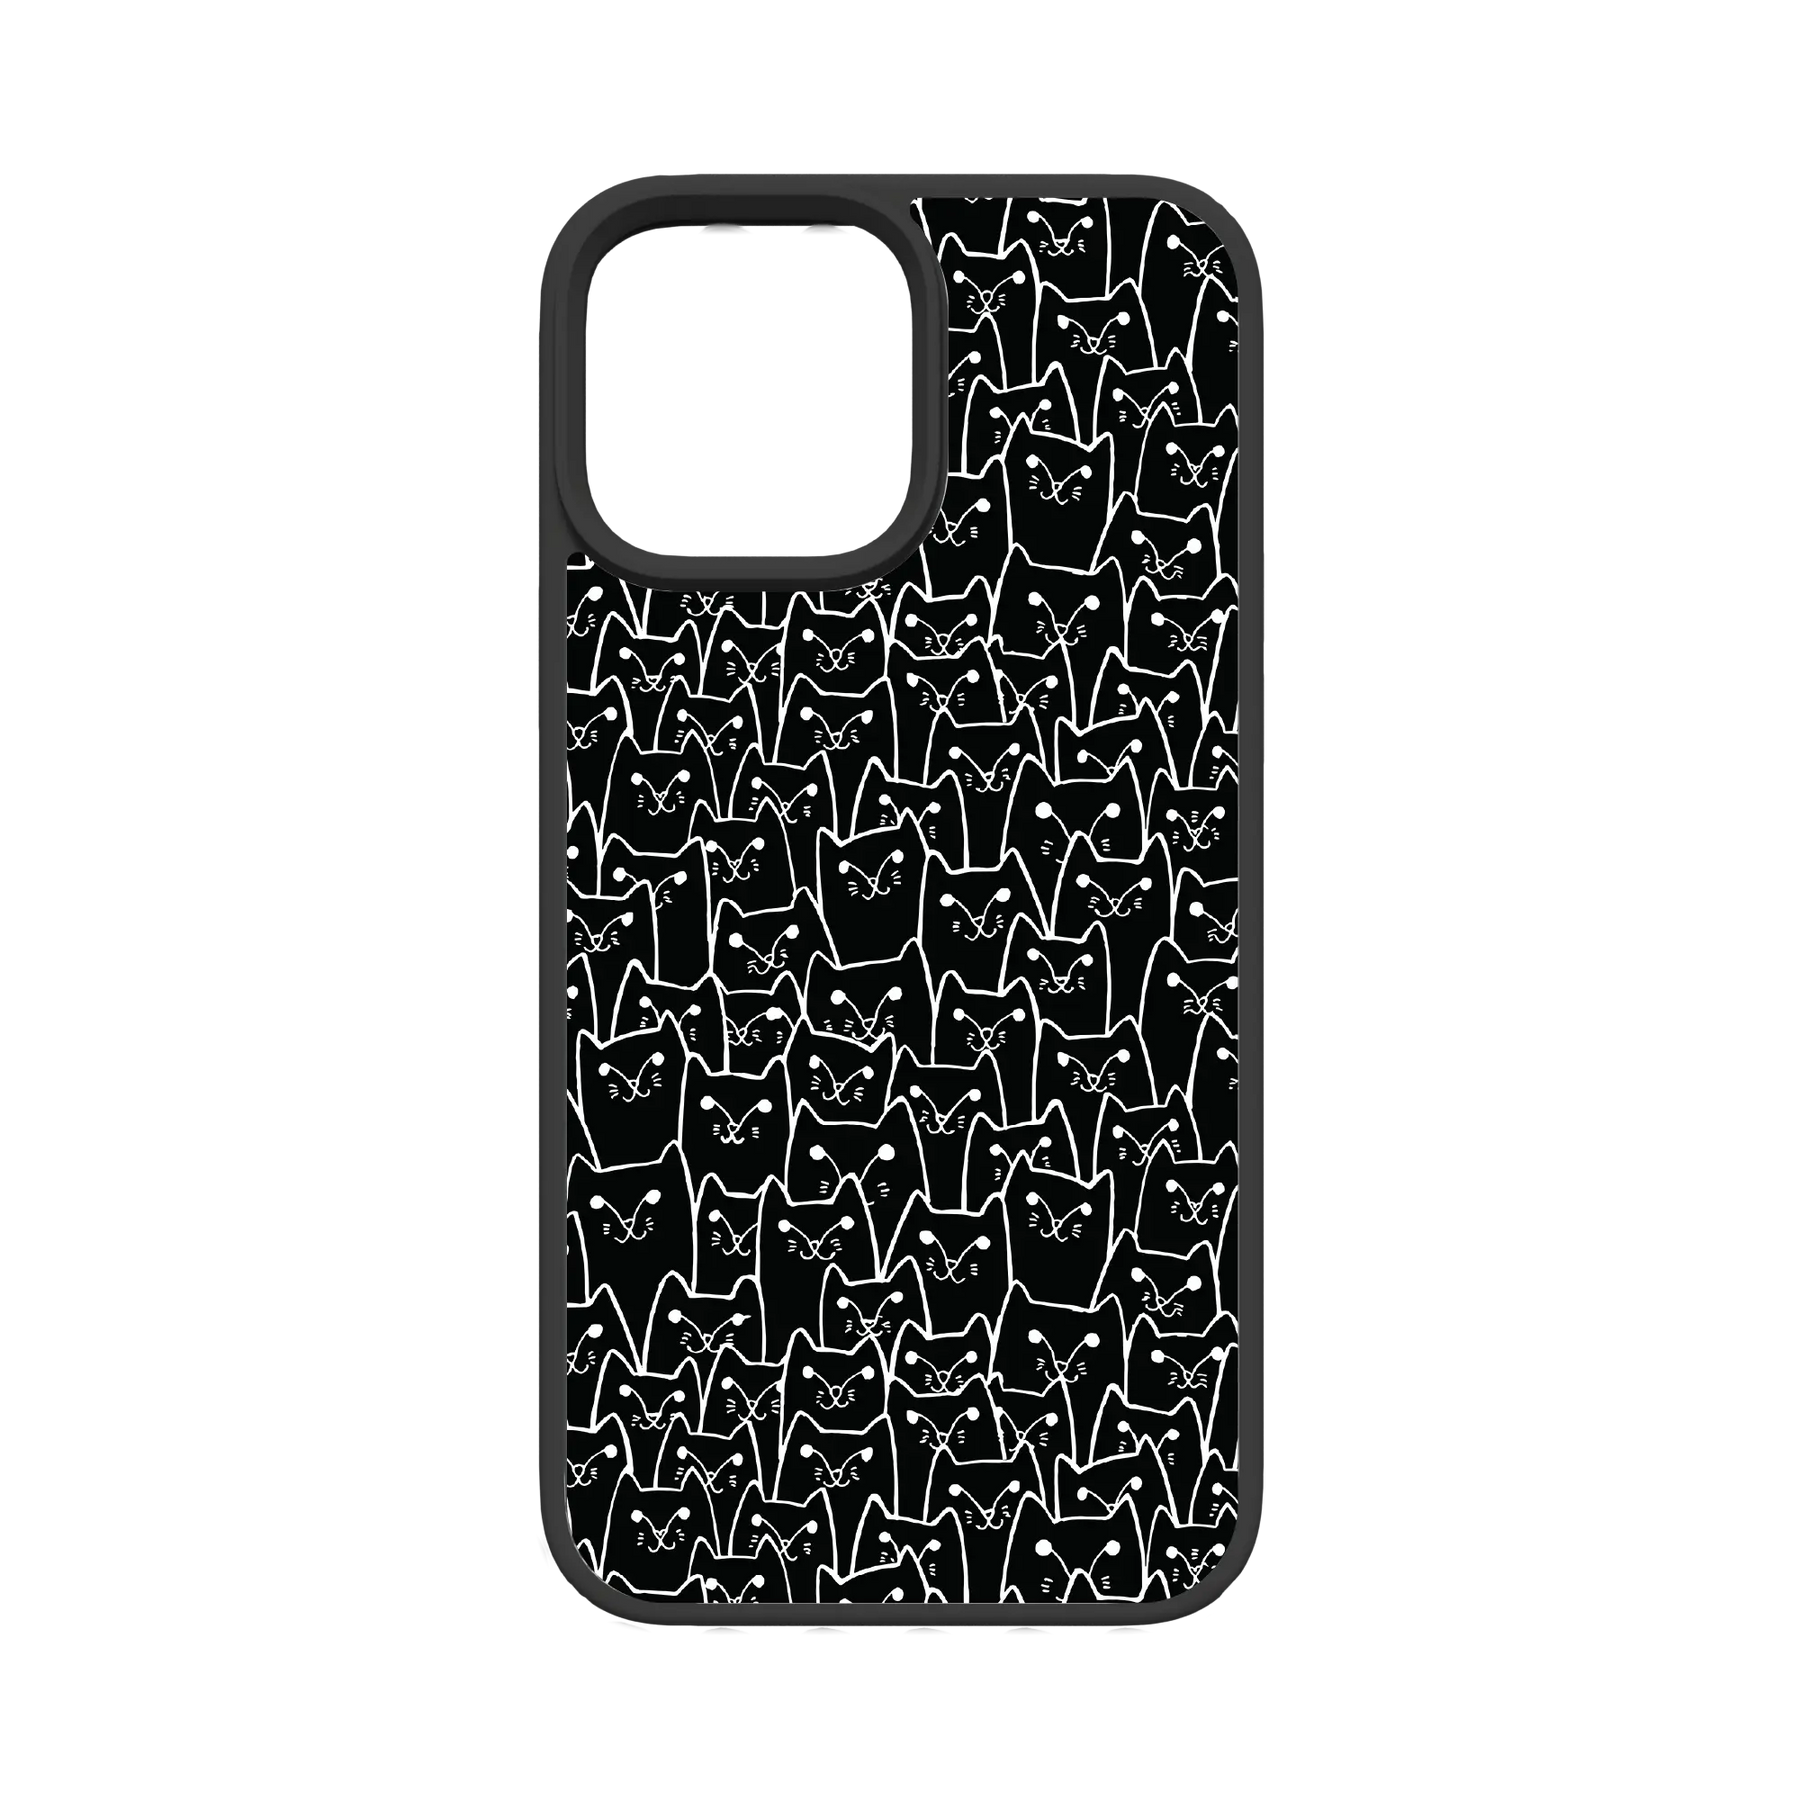 Apple-iPhone-13-Pro-Max-Crystal-Clear Black Cat Pattern | Protective MagSafe Case | Cats Meow Series for Apple iPhone 13 Series cellhelmet cellhelmet